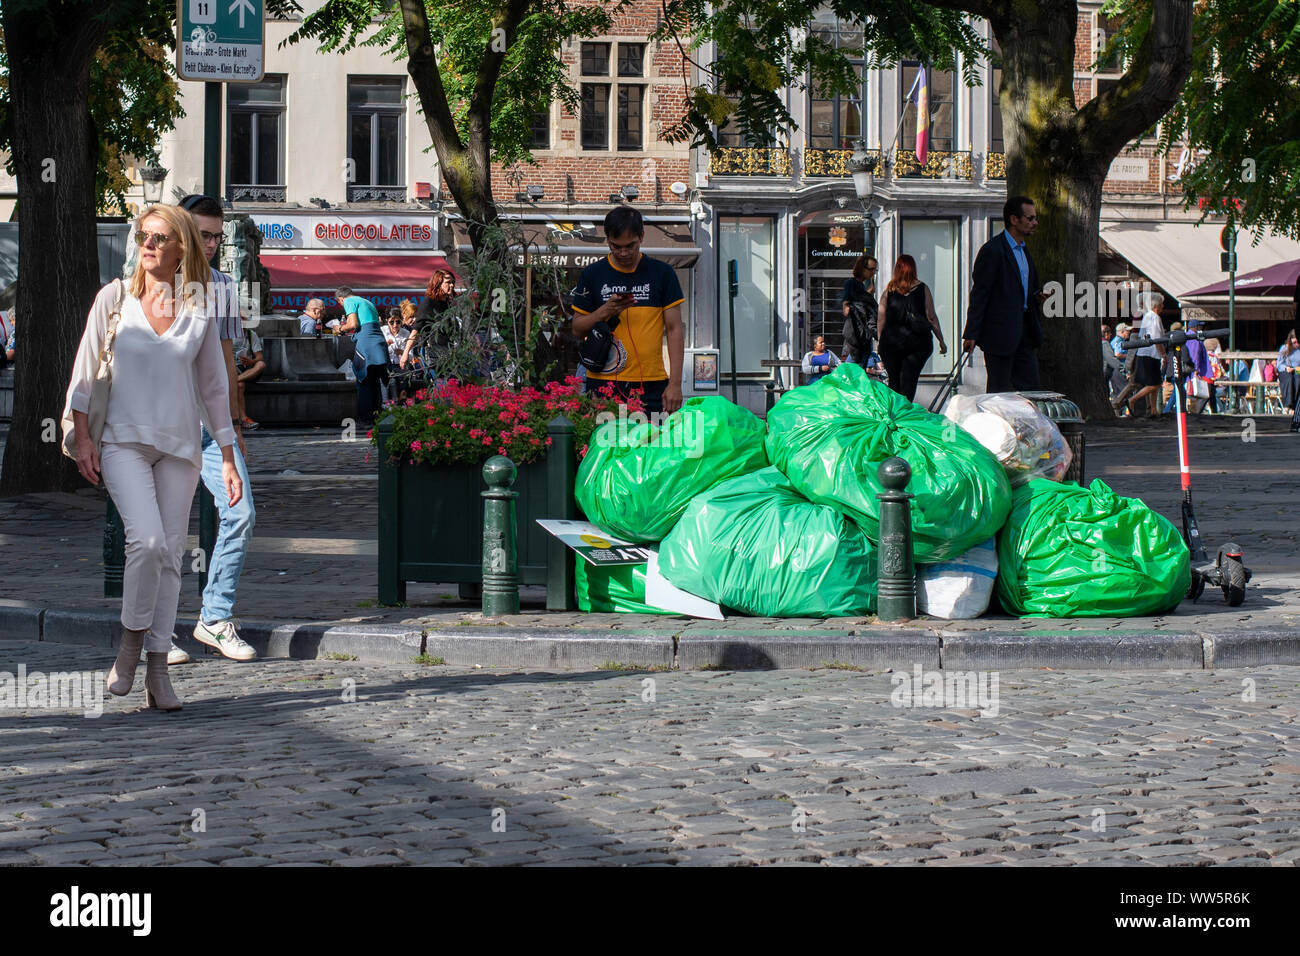 A pile of garbage bags of domestic and commercial waste on a central square in Brussels, as passers-by look away Stock Photo